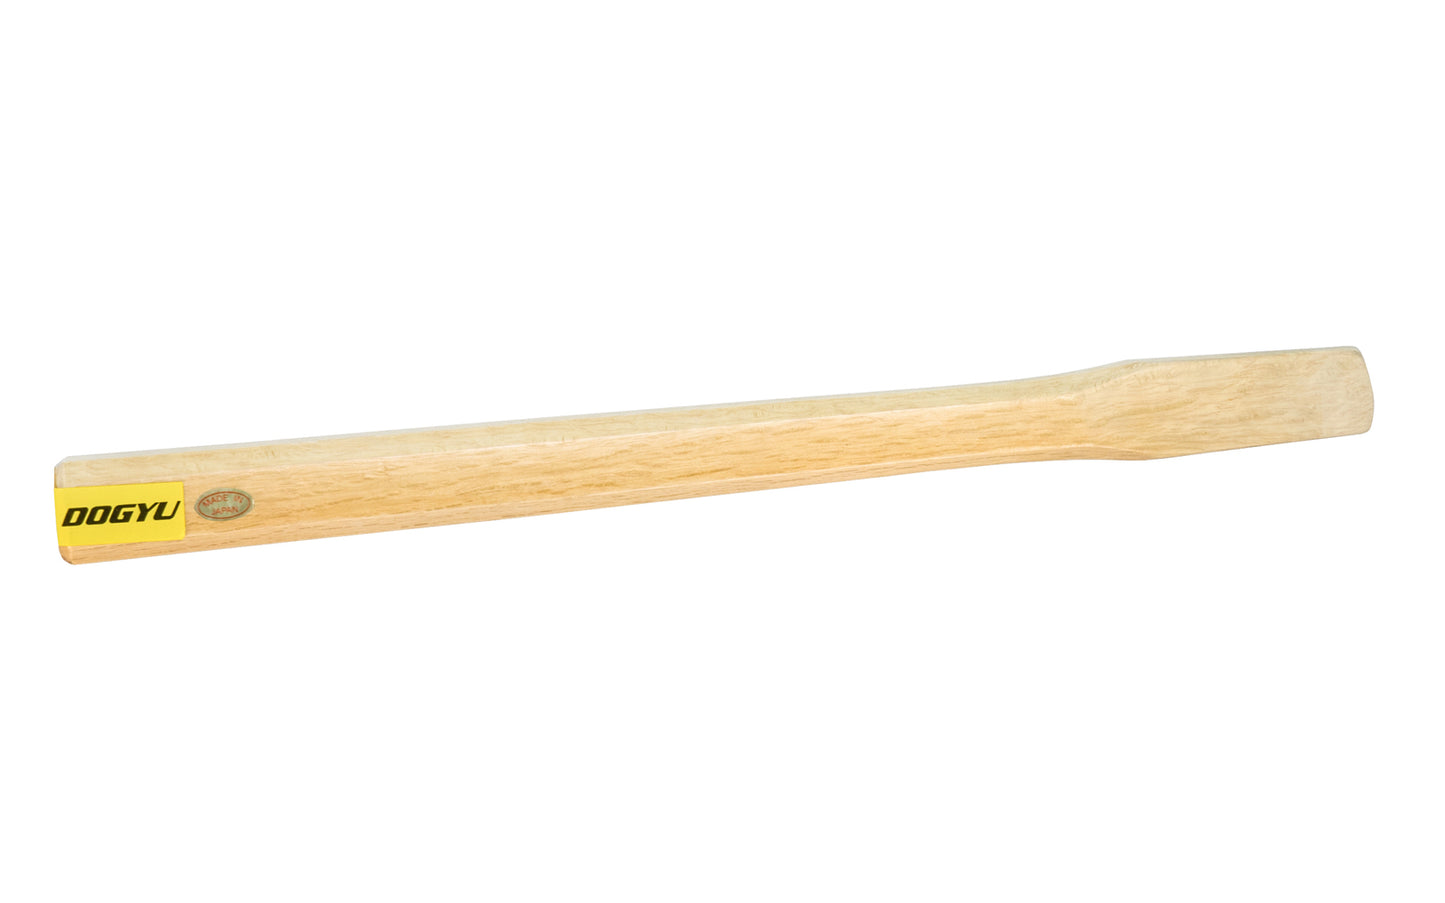 Replacement handle for the Japanese Dogyu Kariwaku Hammer - 355 g  model. Wooden handle is made of Japanese White Oak.   Made in Japan. 4962819003718. Model 003718. 